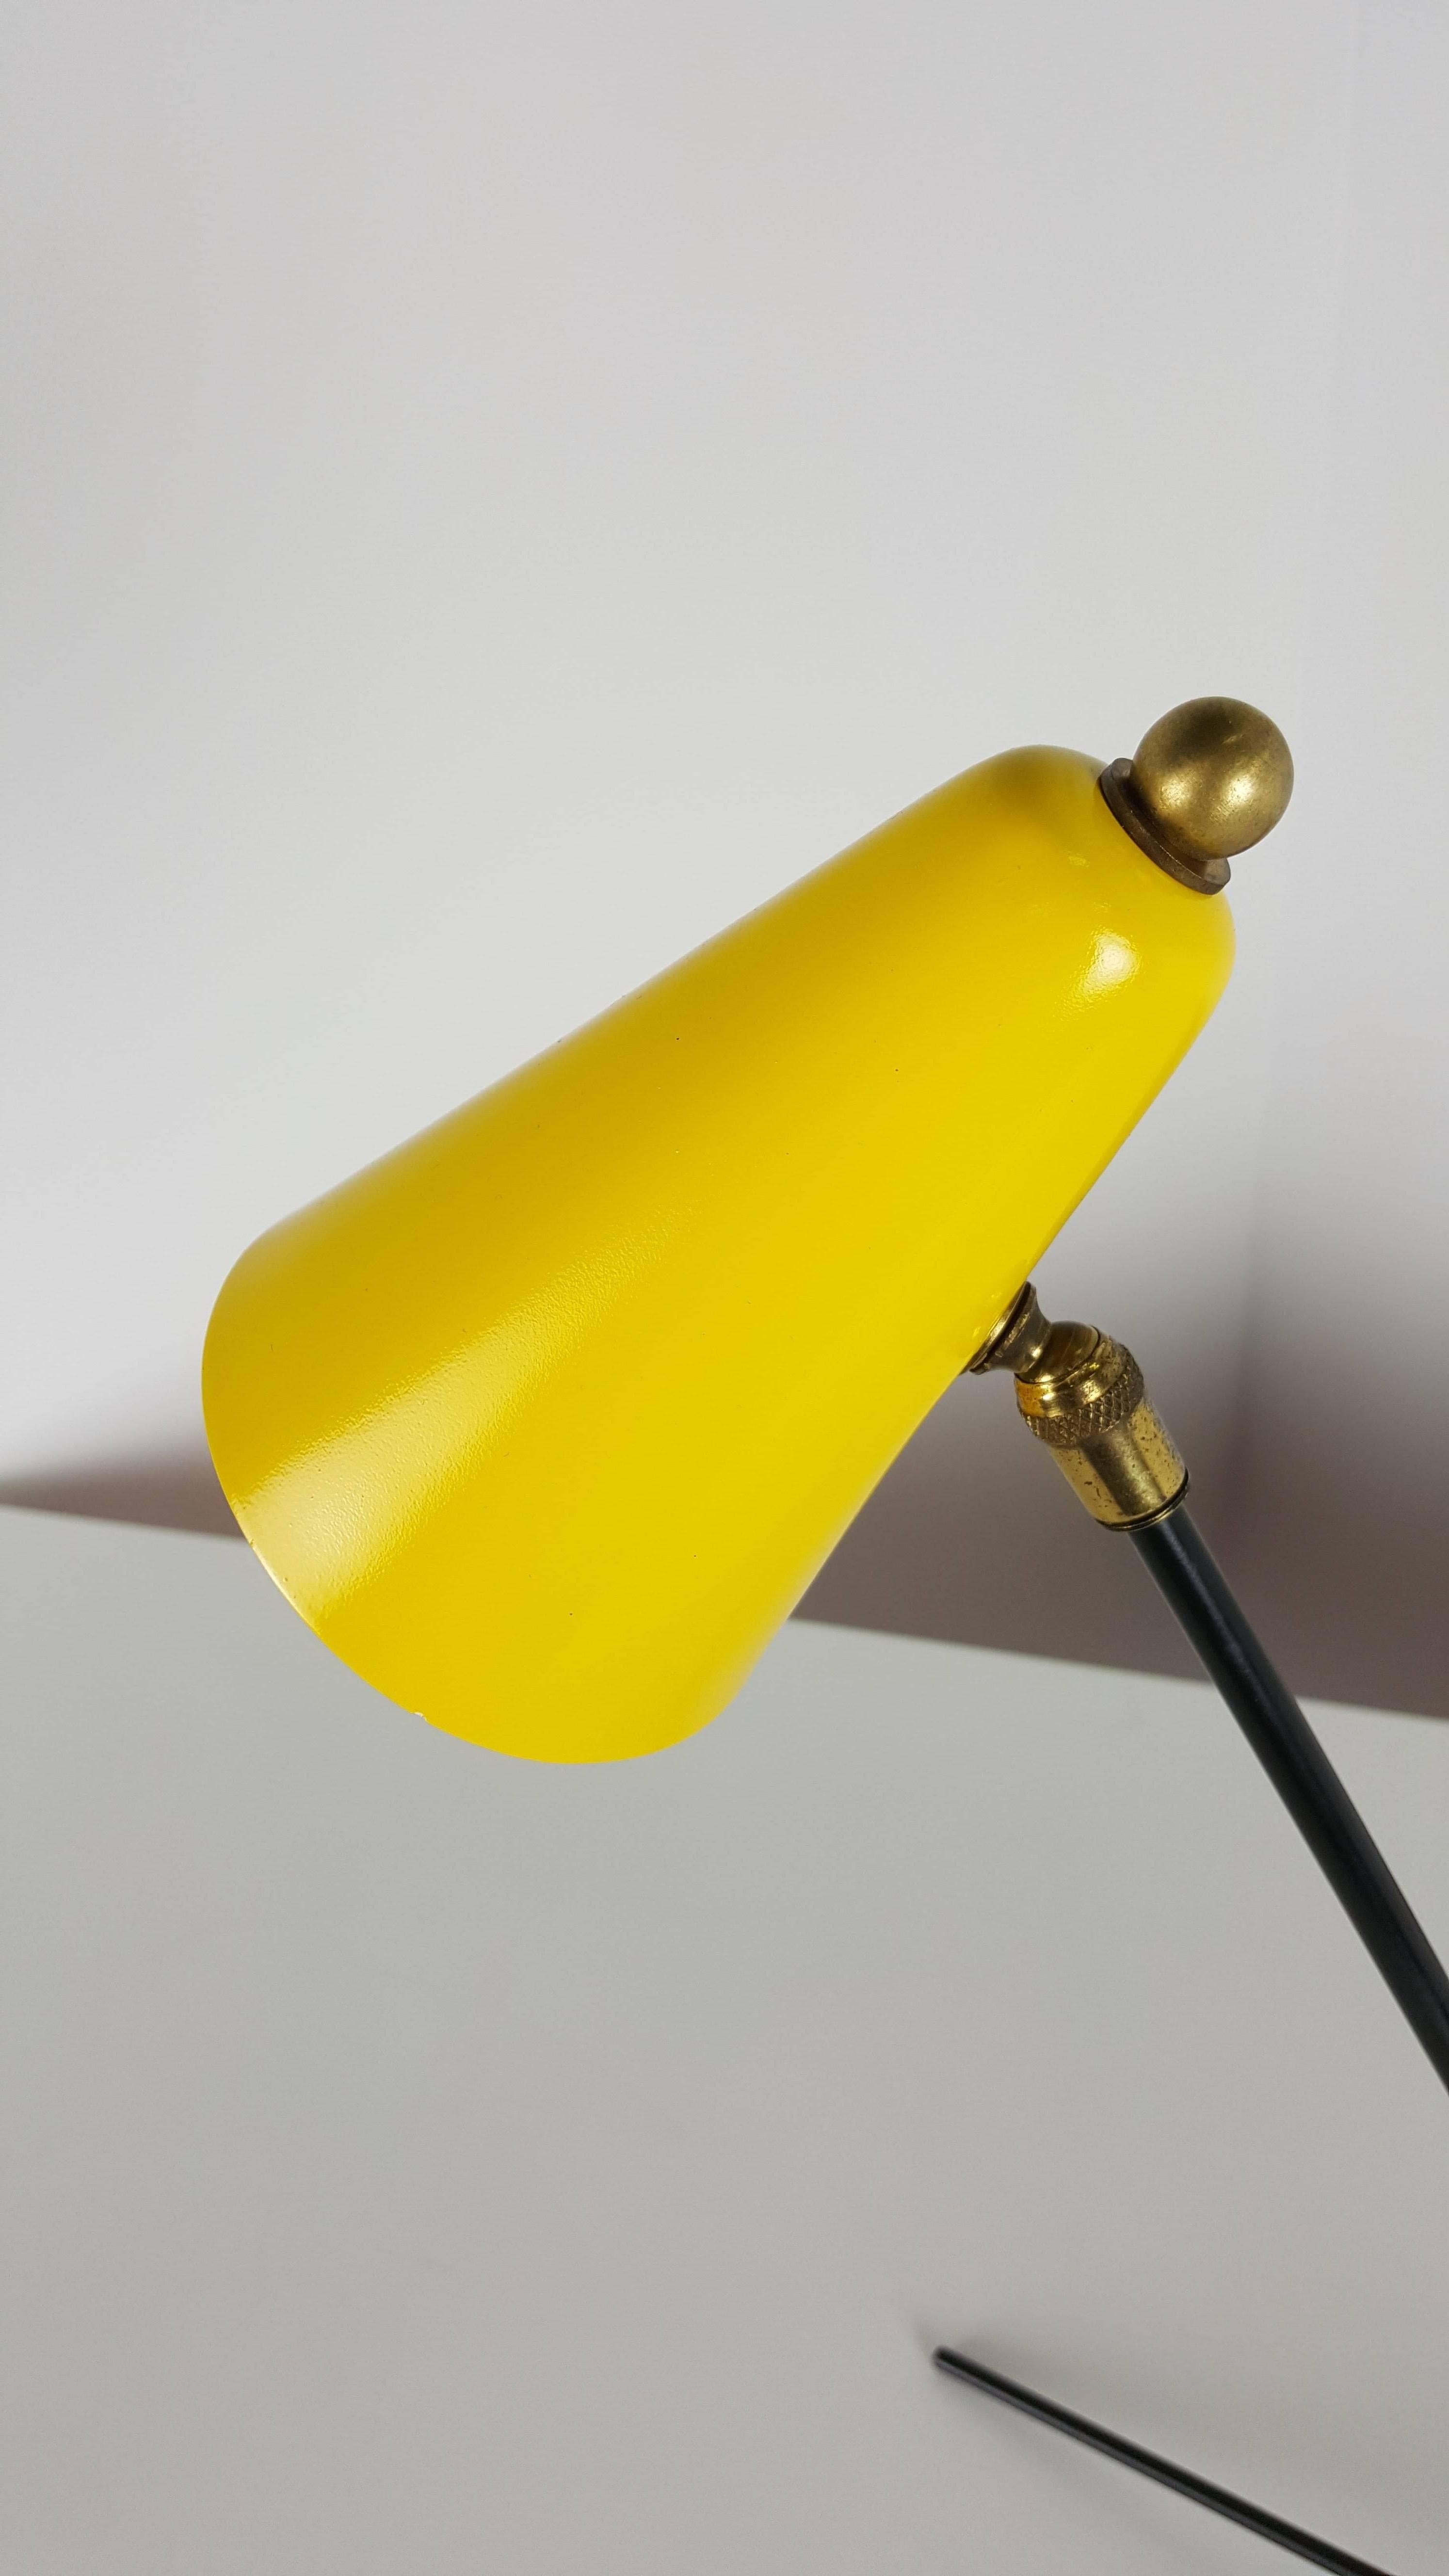 Mid-Century Modern Enameled Desk Lamp in the Style of Serge Mouille, 1950s